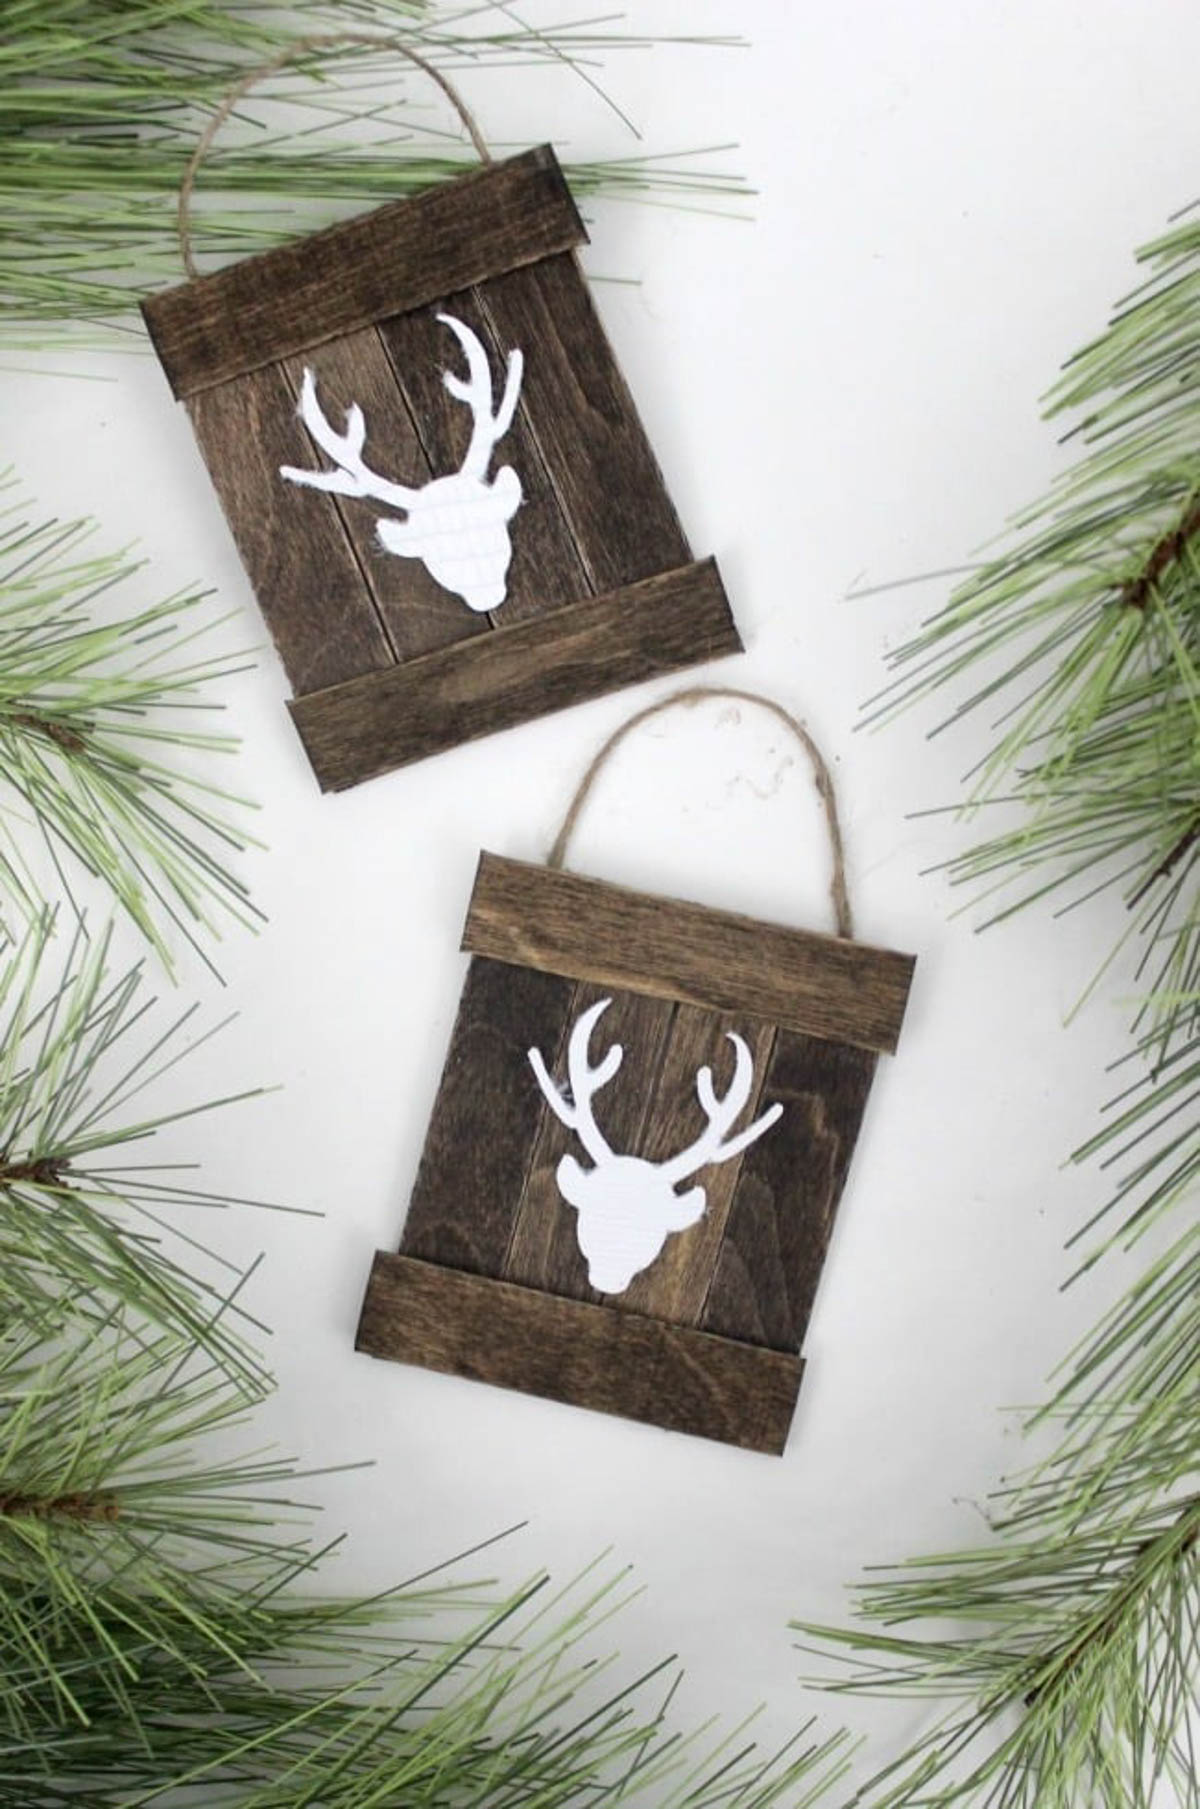 Two completed mini pallet deer ornaments